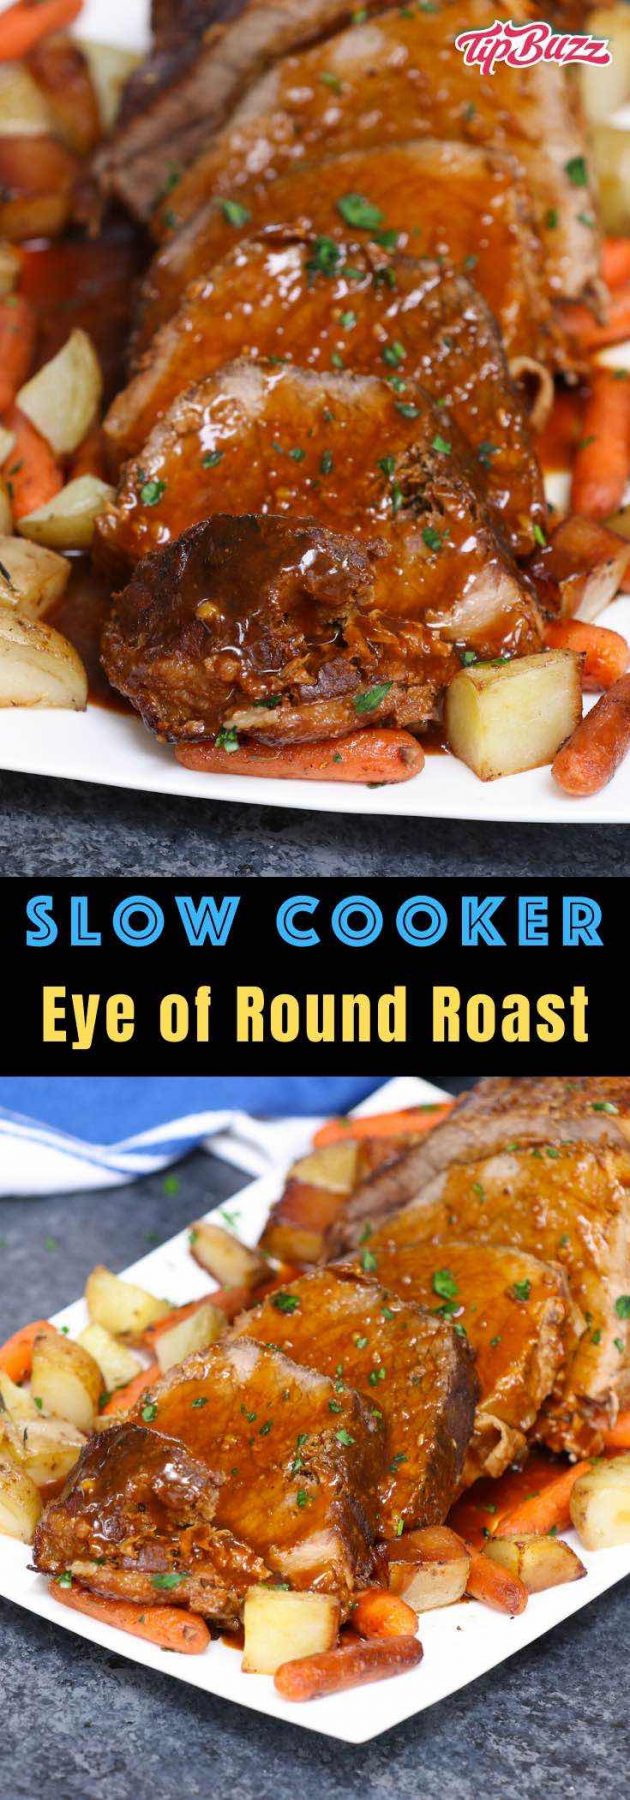 An Eye of Round Roast is a economical cut of beef that, with careful preparation, makes a delicious dinner. Learn how to cook eye of round successfully in the crock pot or oven. #EyeofRoundRoast #EyeOfRound